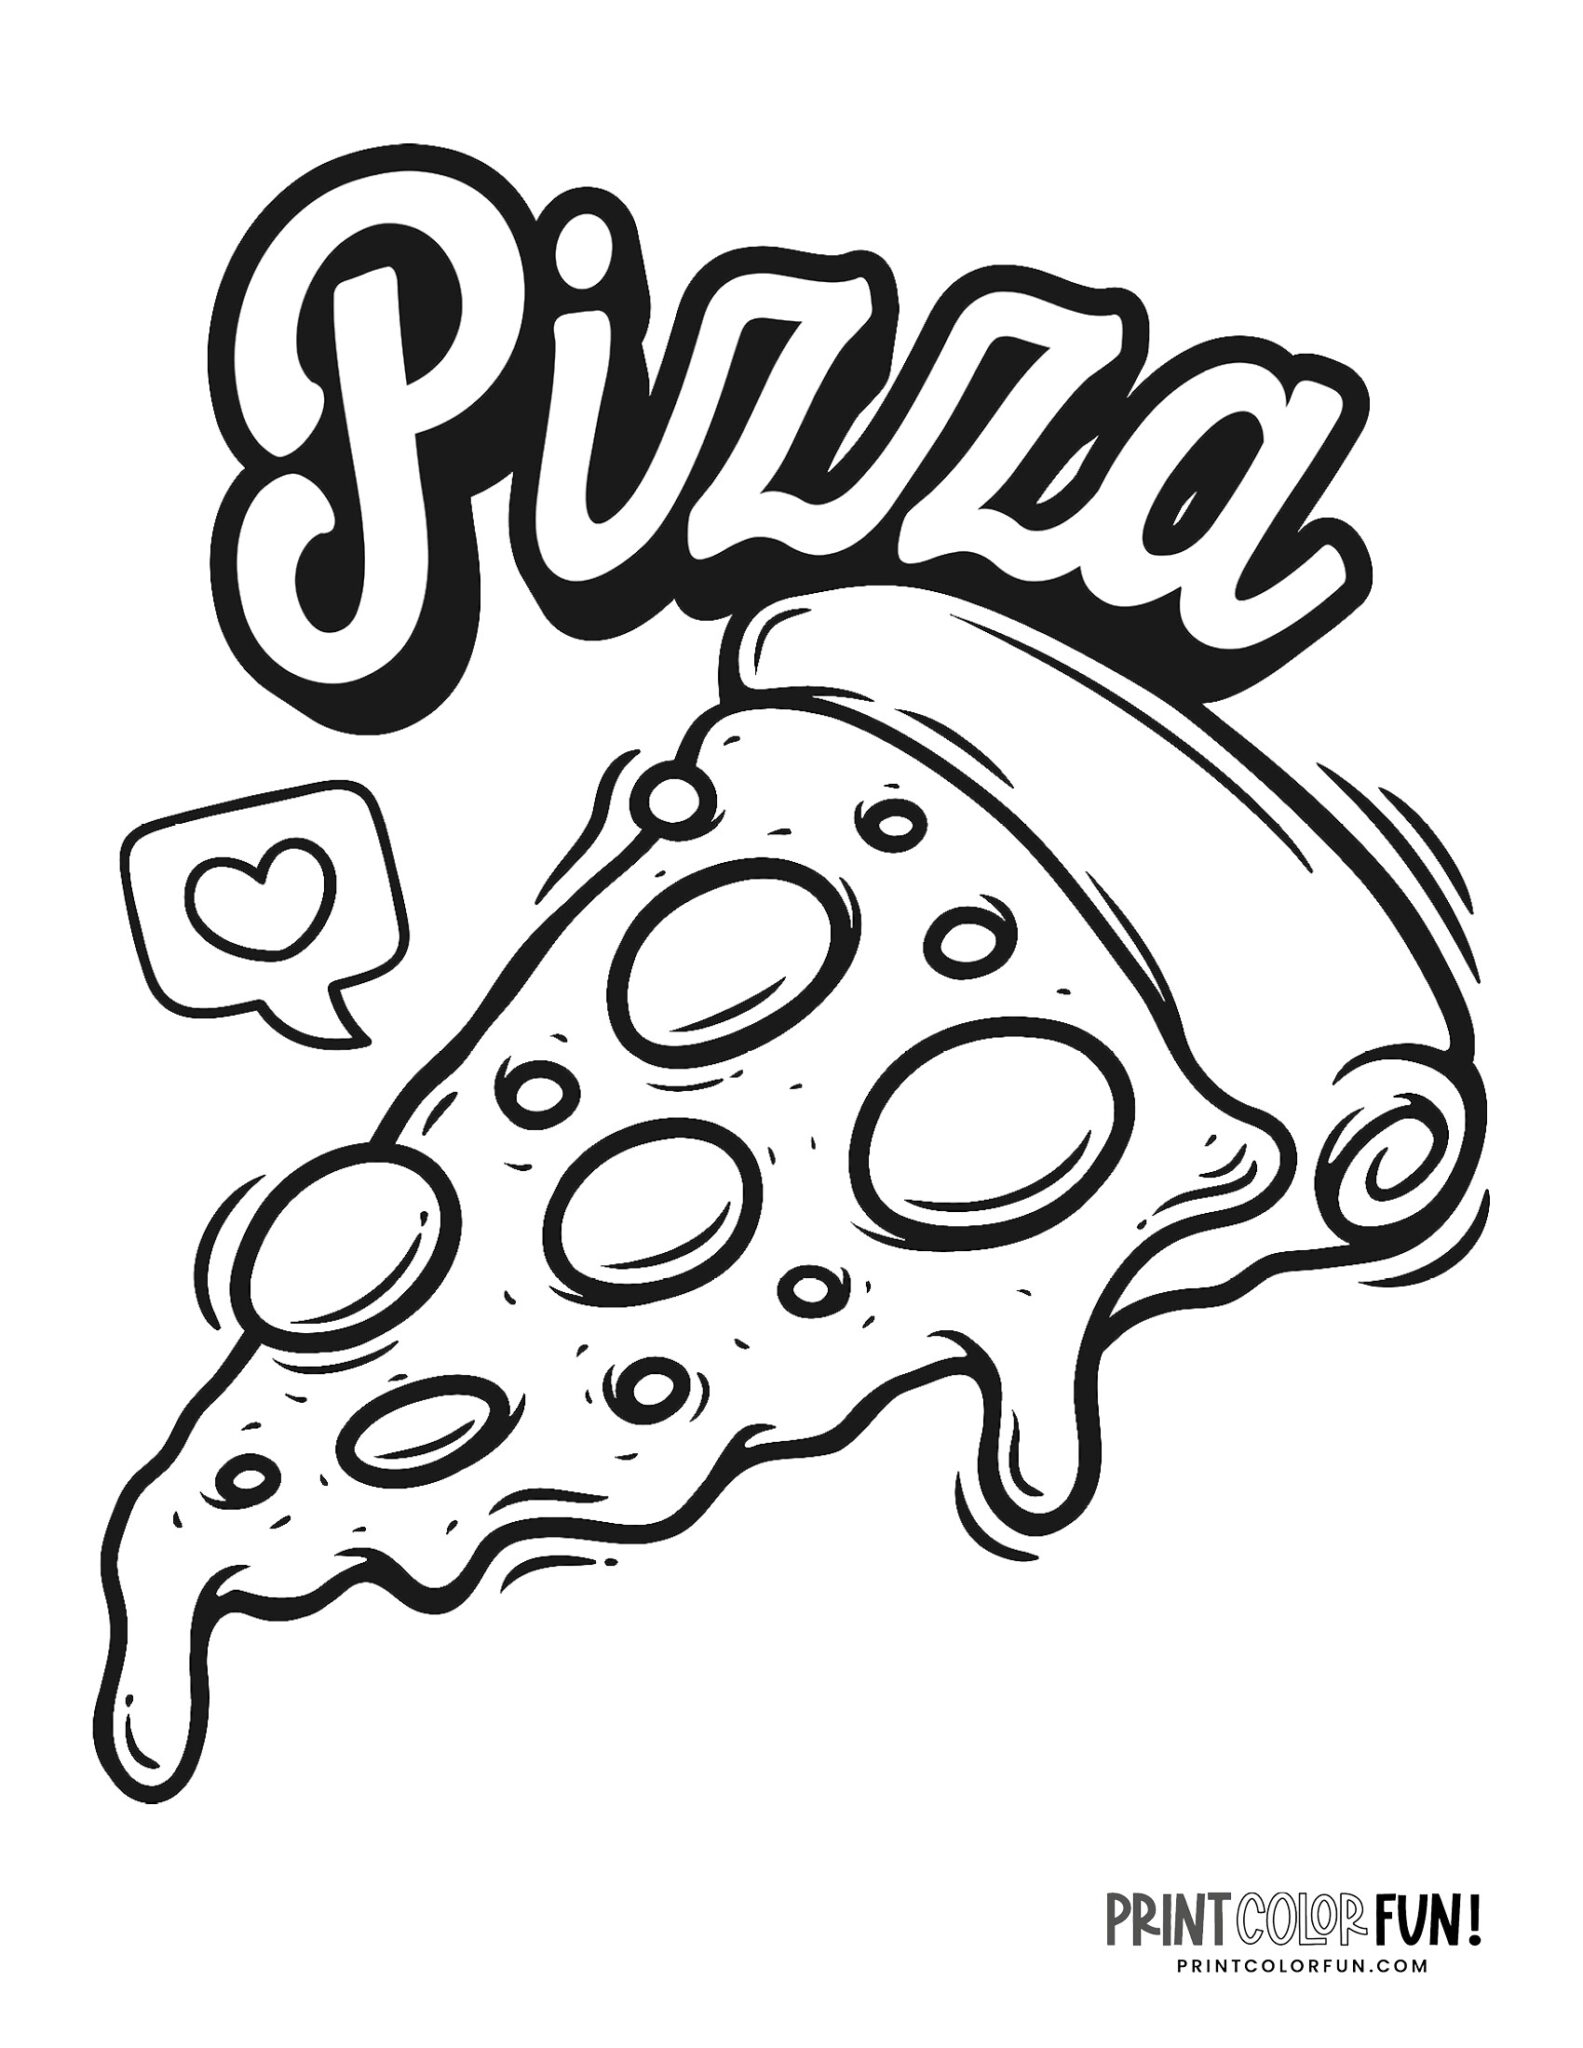 Pizza coloring pages: Slices whole pizza pies at PrintColorFun com